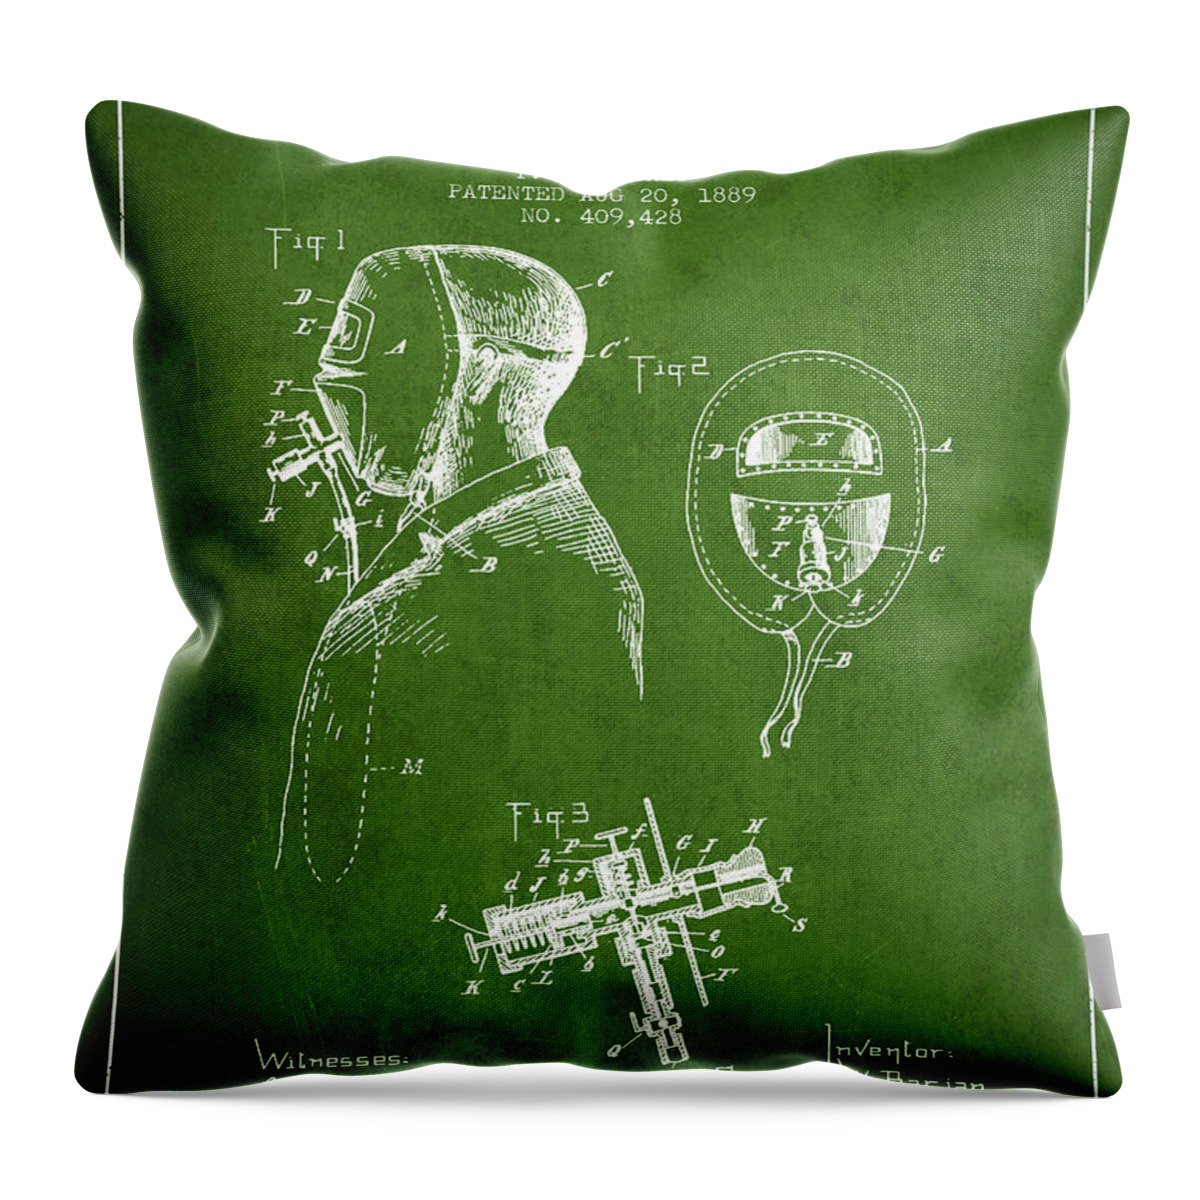 Fireman Throw Pillow featuring the digital art Firemans Safety Helmet Patent from 1889 - Green by Aged Pixel